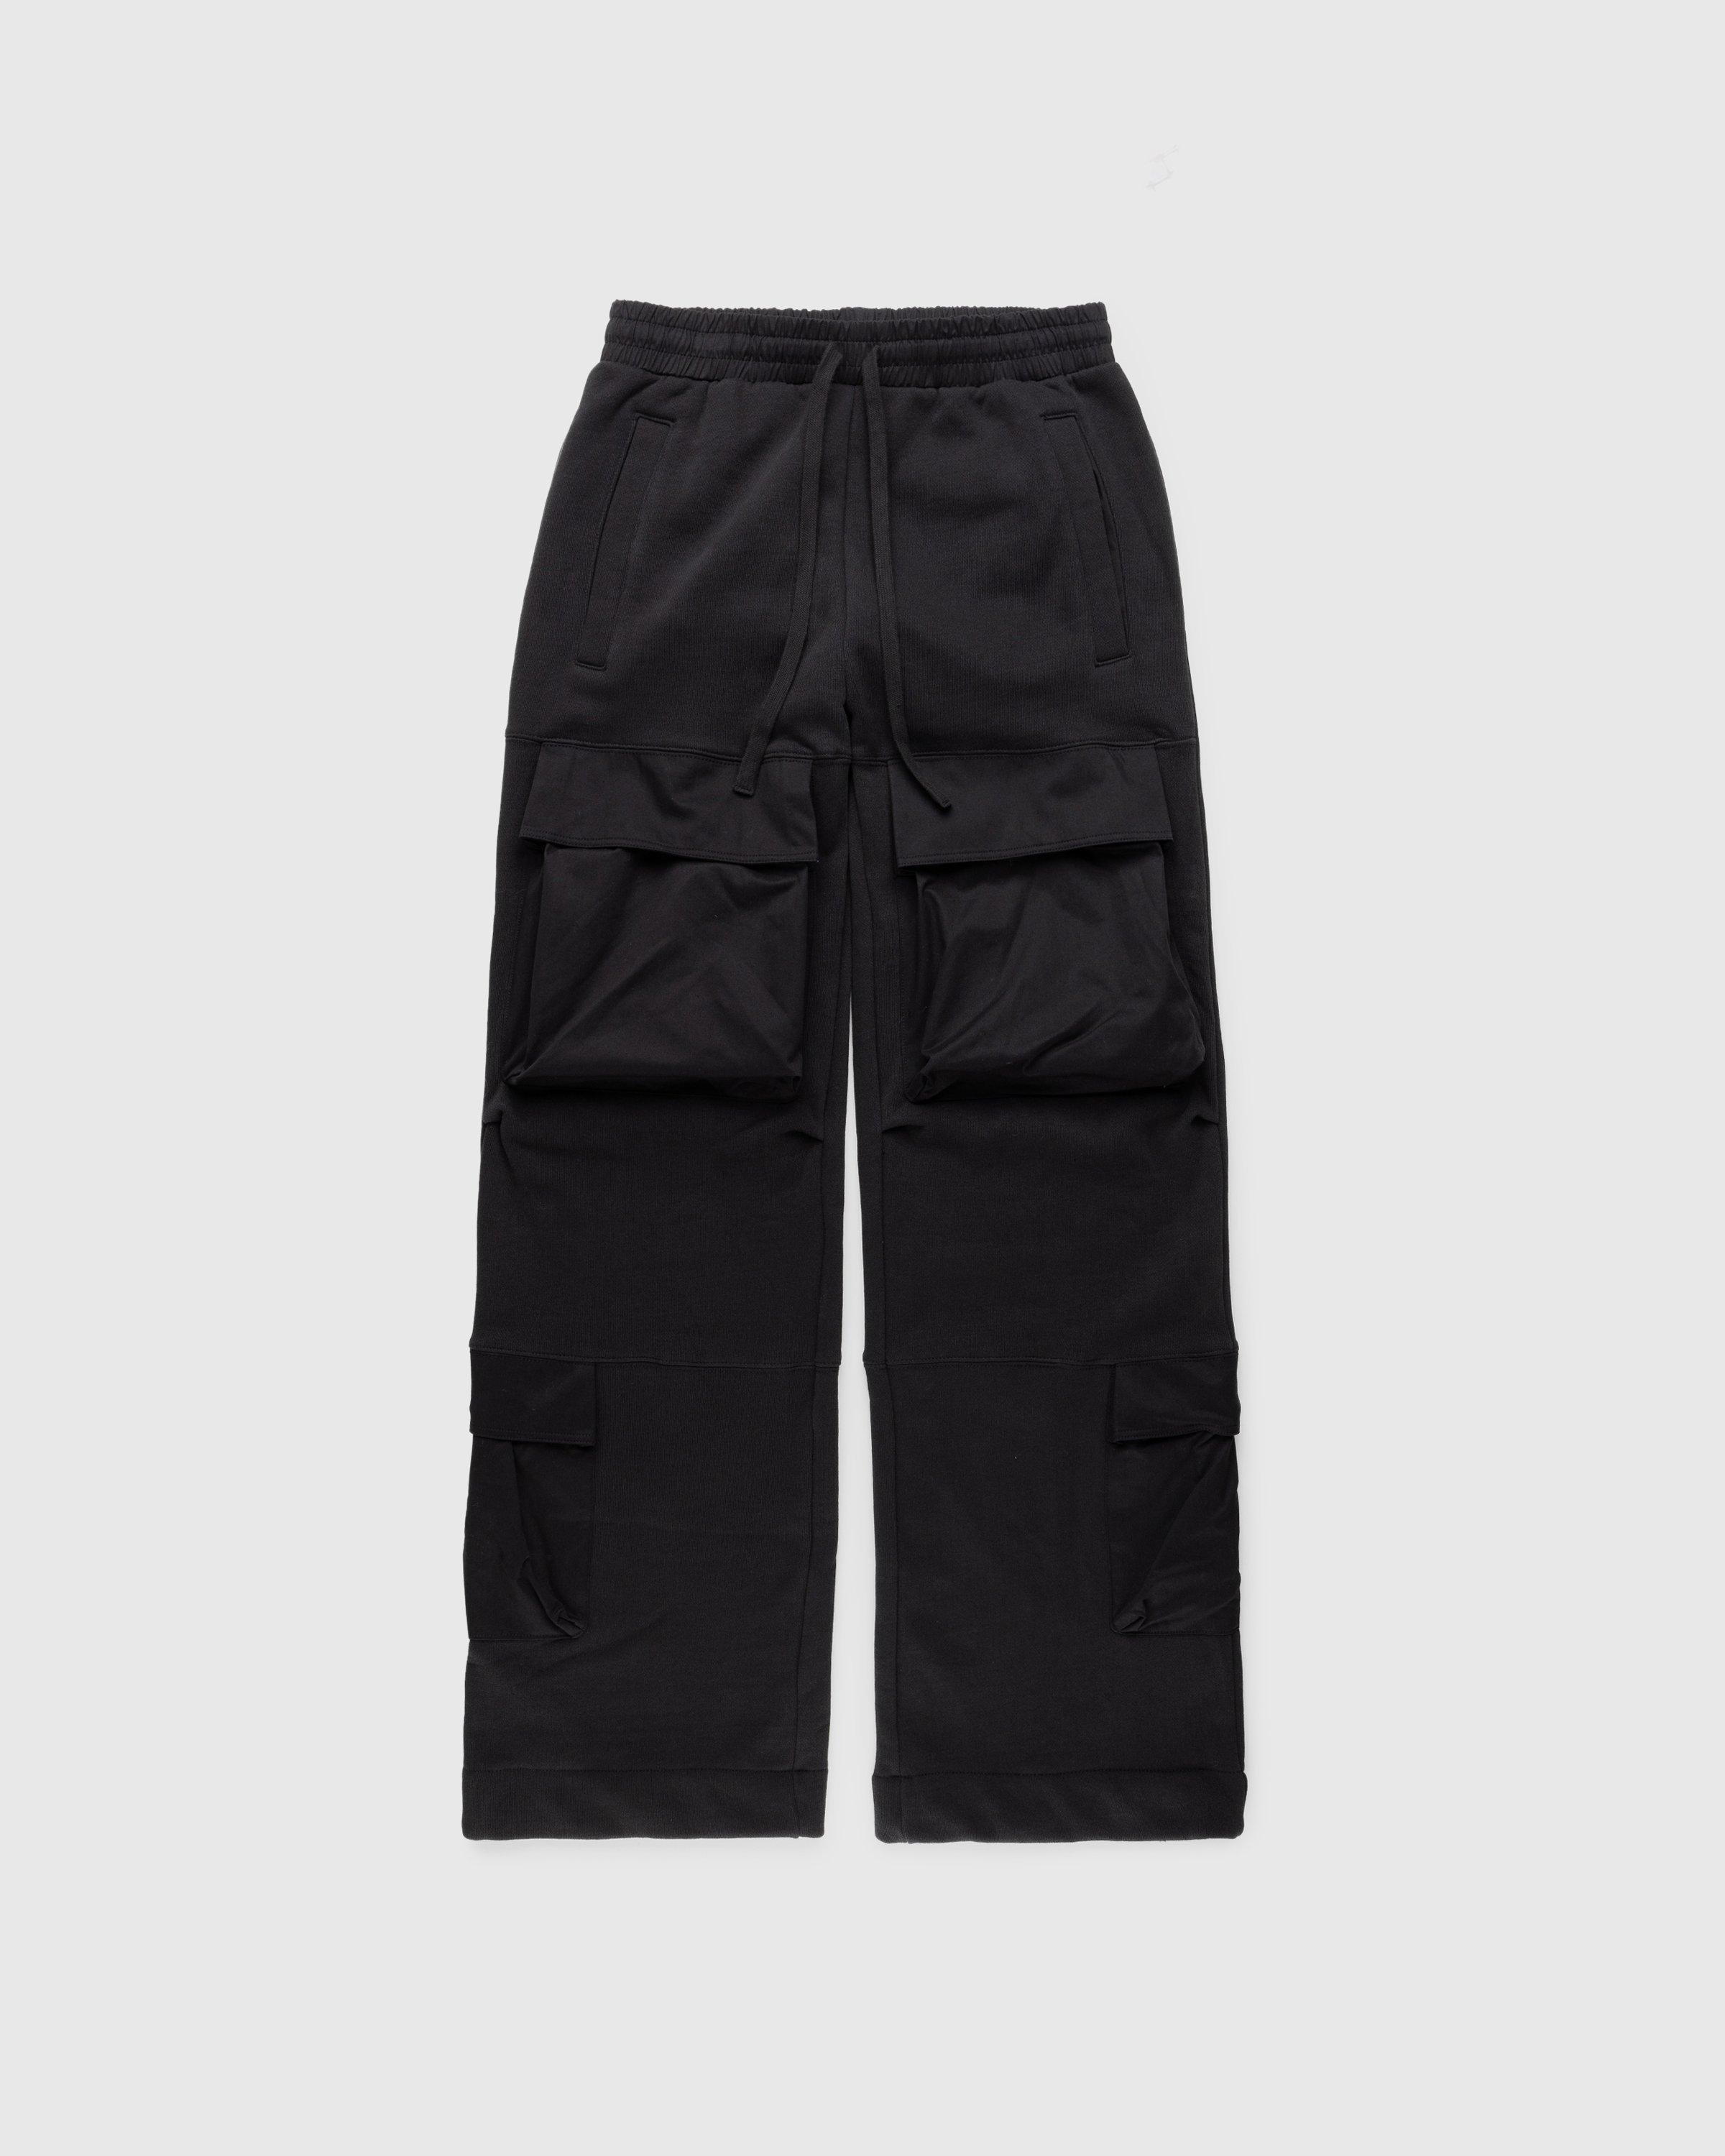 Entire StudiosUtility Sweats Soot by HIGHSNOBIETY